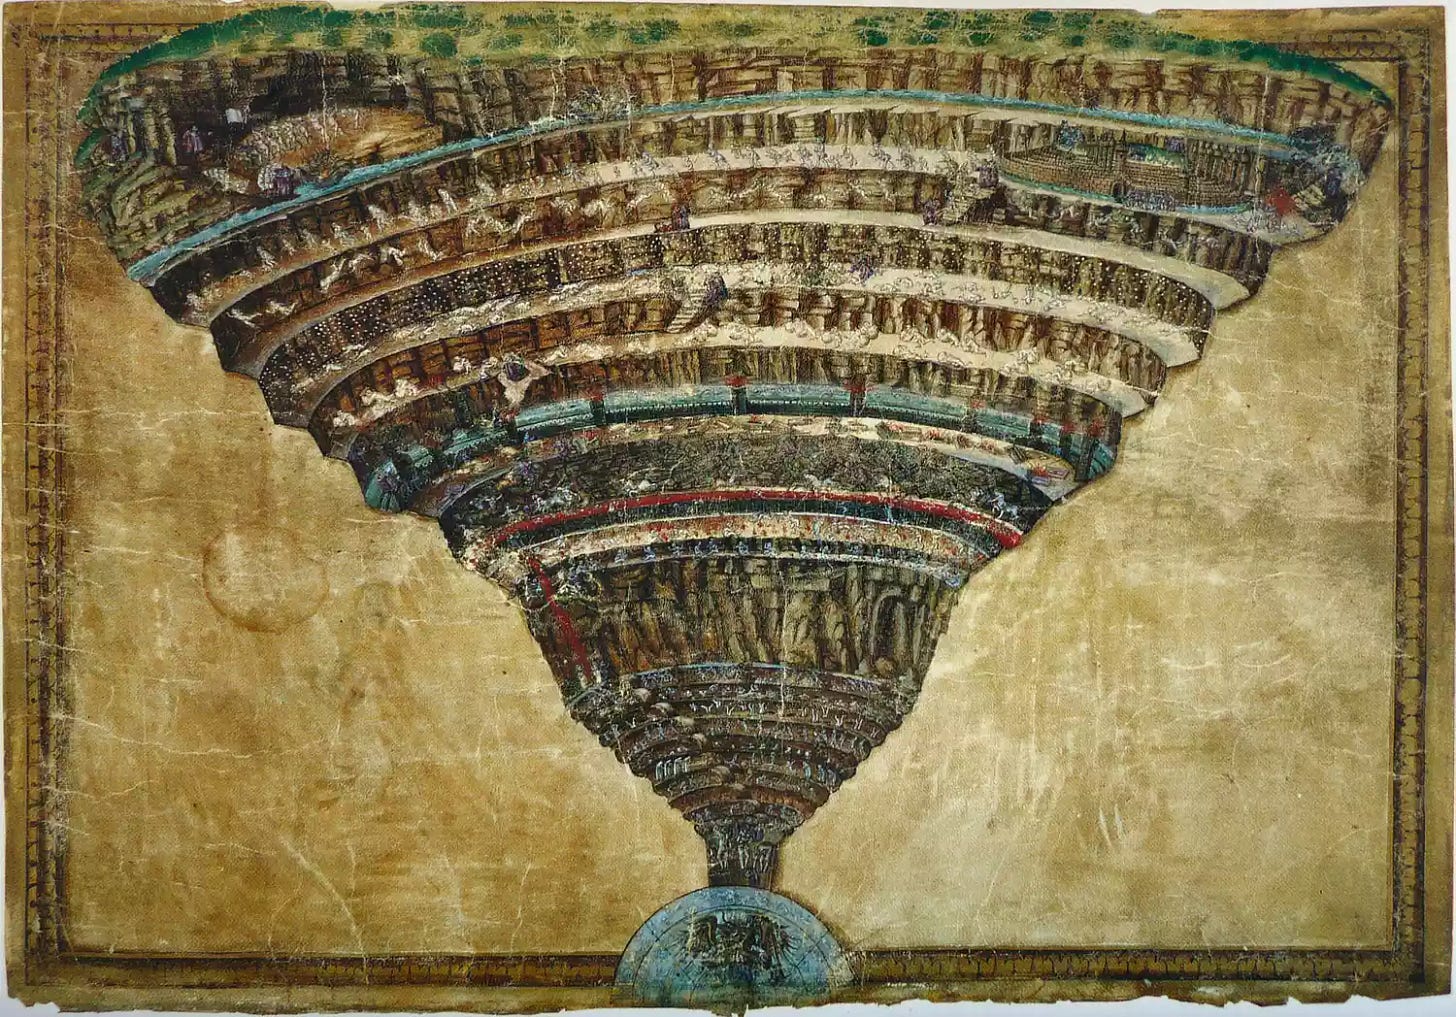 Illustration to the Divine Comedy by Dante Alighieri (Abyss of Hell), 1480-1490